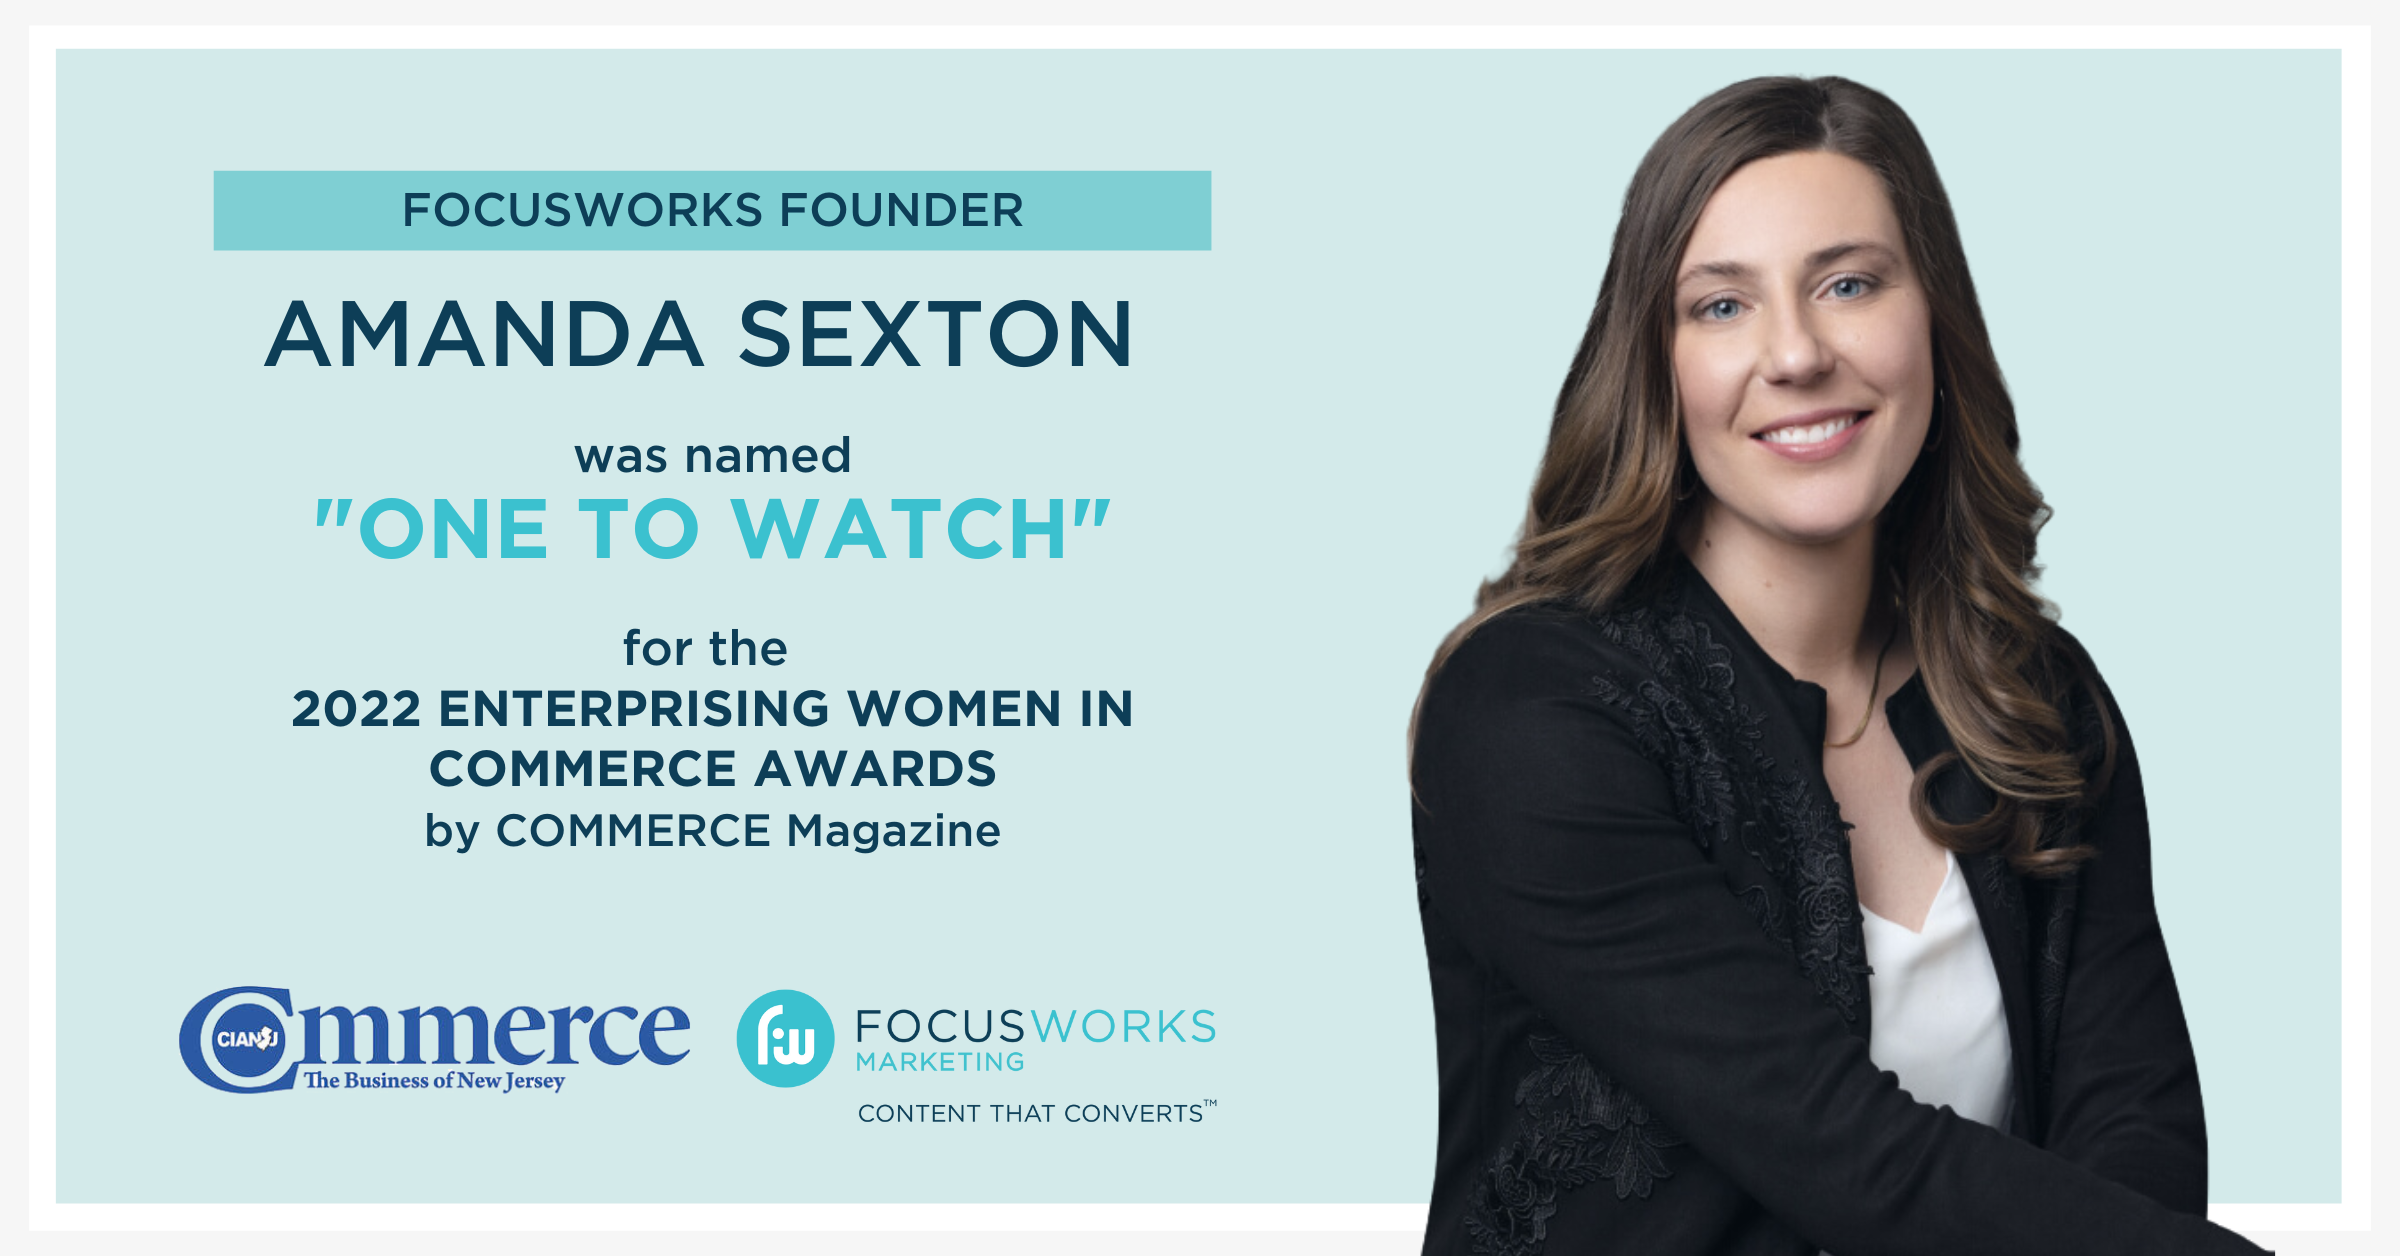 focusworks-founder-amanda-sexton-was-named-a-top-enterprising-woman-by-commerce-industry